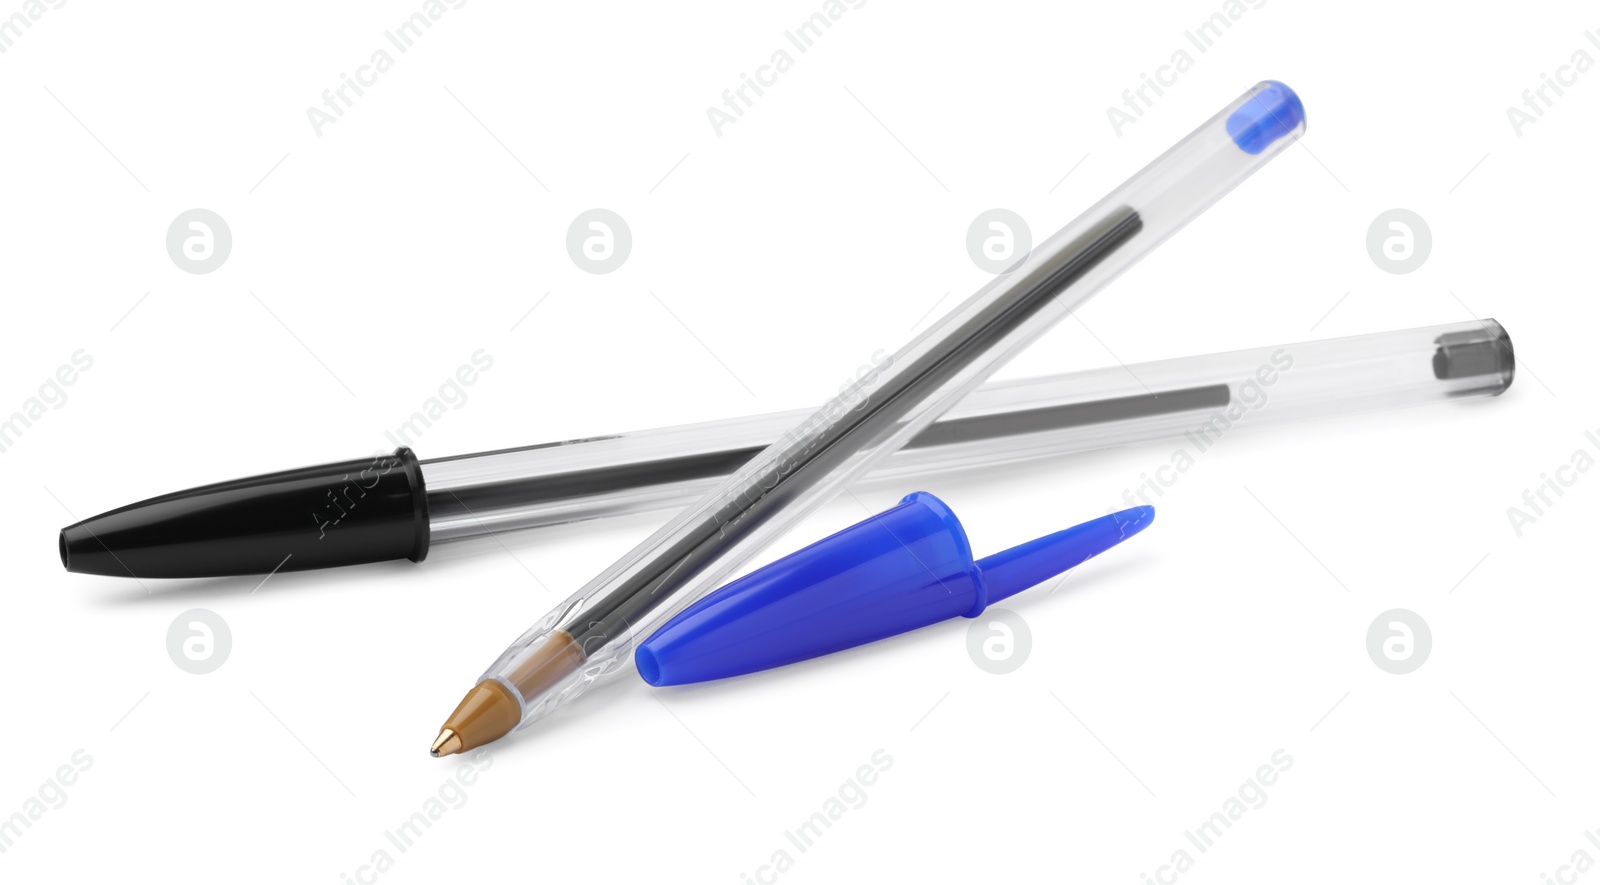 Photo of New black and blue pens isolated on white